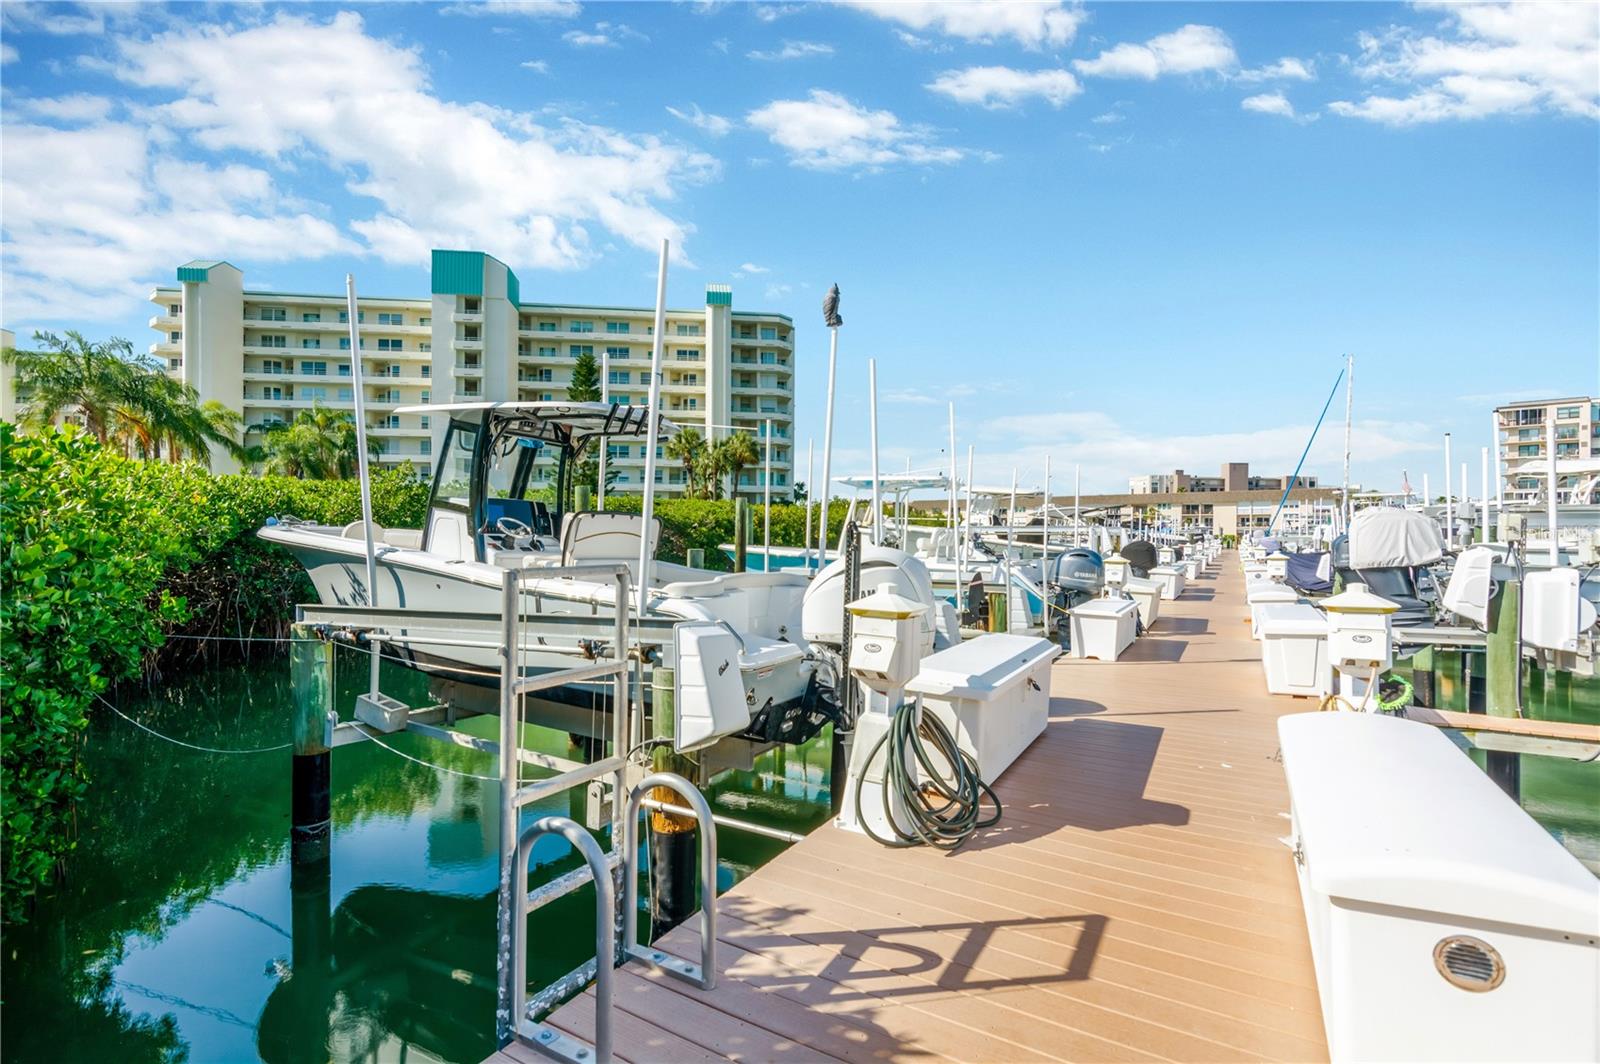 Boat Dock area - Renting a Deeded Boat Slip or Buying from a current Owner may be a possibility.